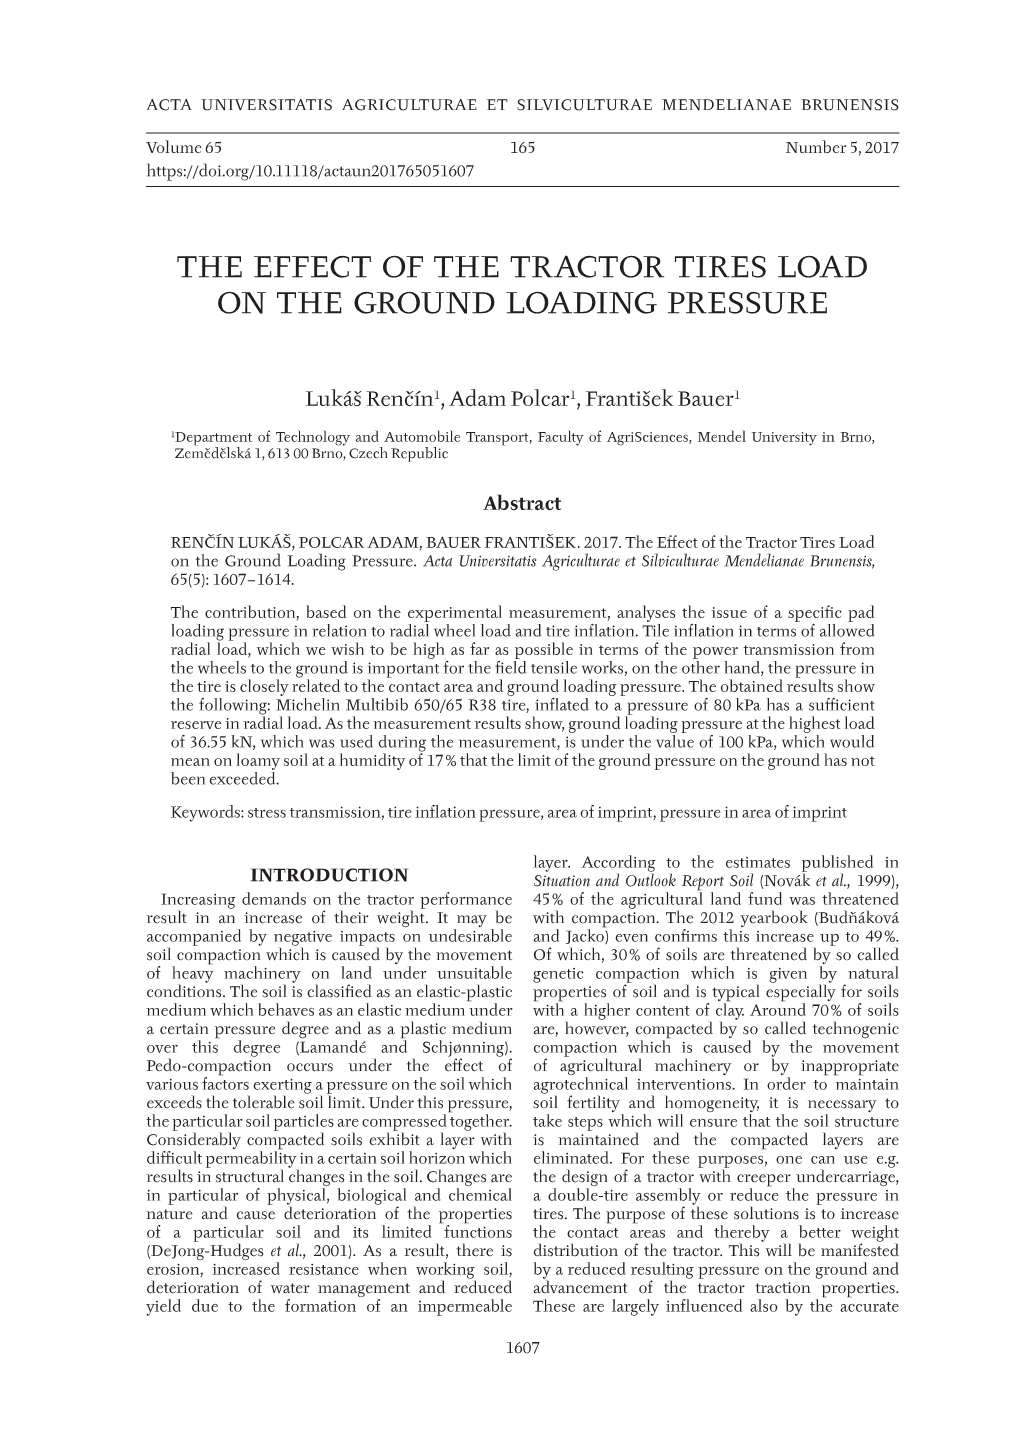 The Effect of the Tractor Tires Load on the Ground Loading Pressure